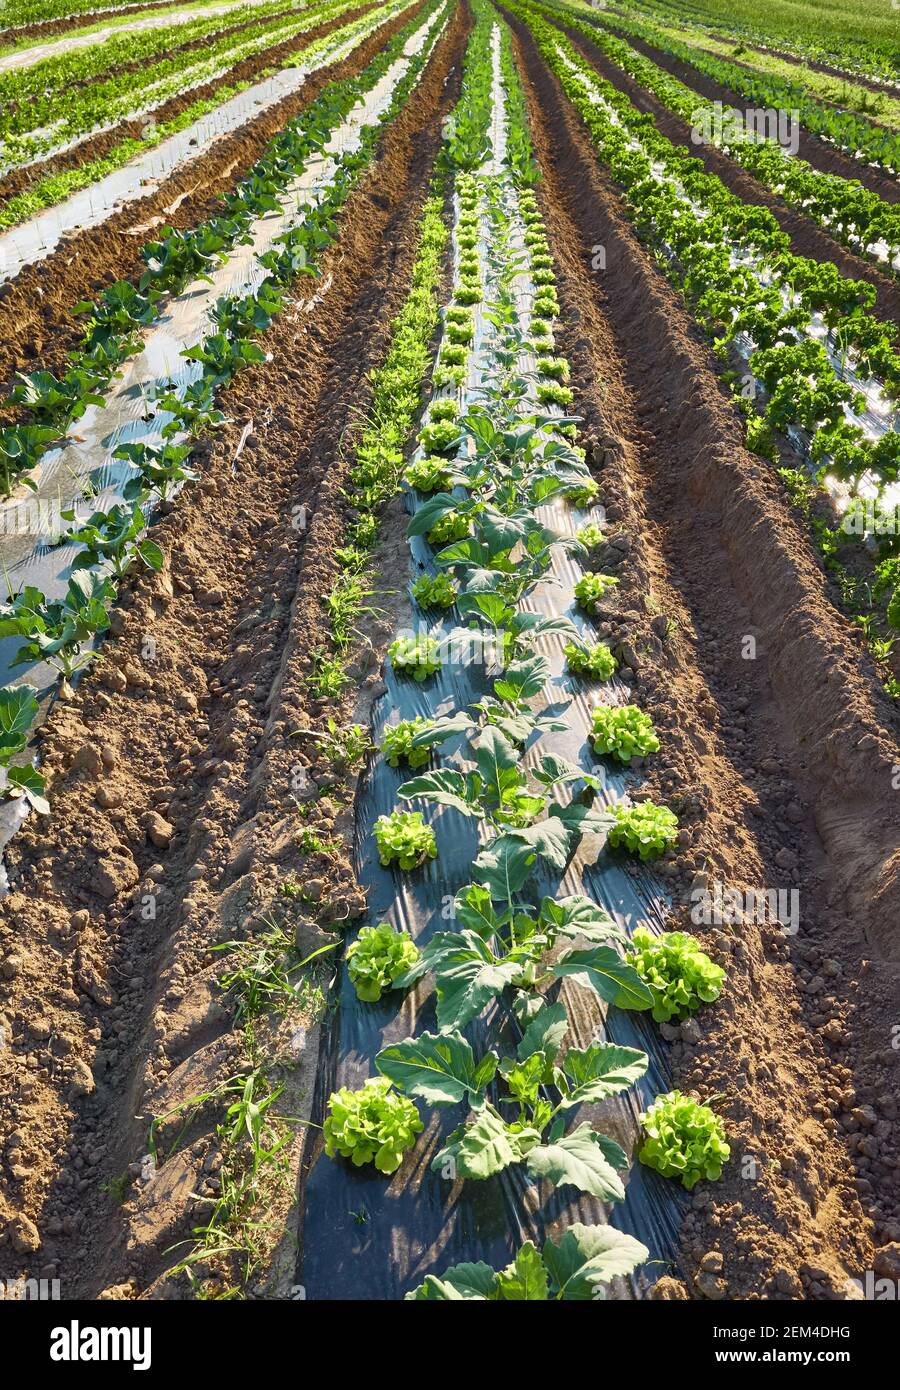 Organic farm field with patches covered with plastic mulch used to suppress weeds and conserve water. Stock Photo